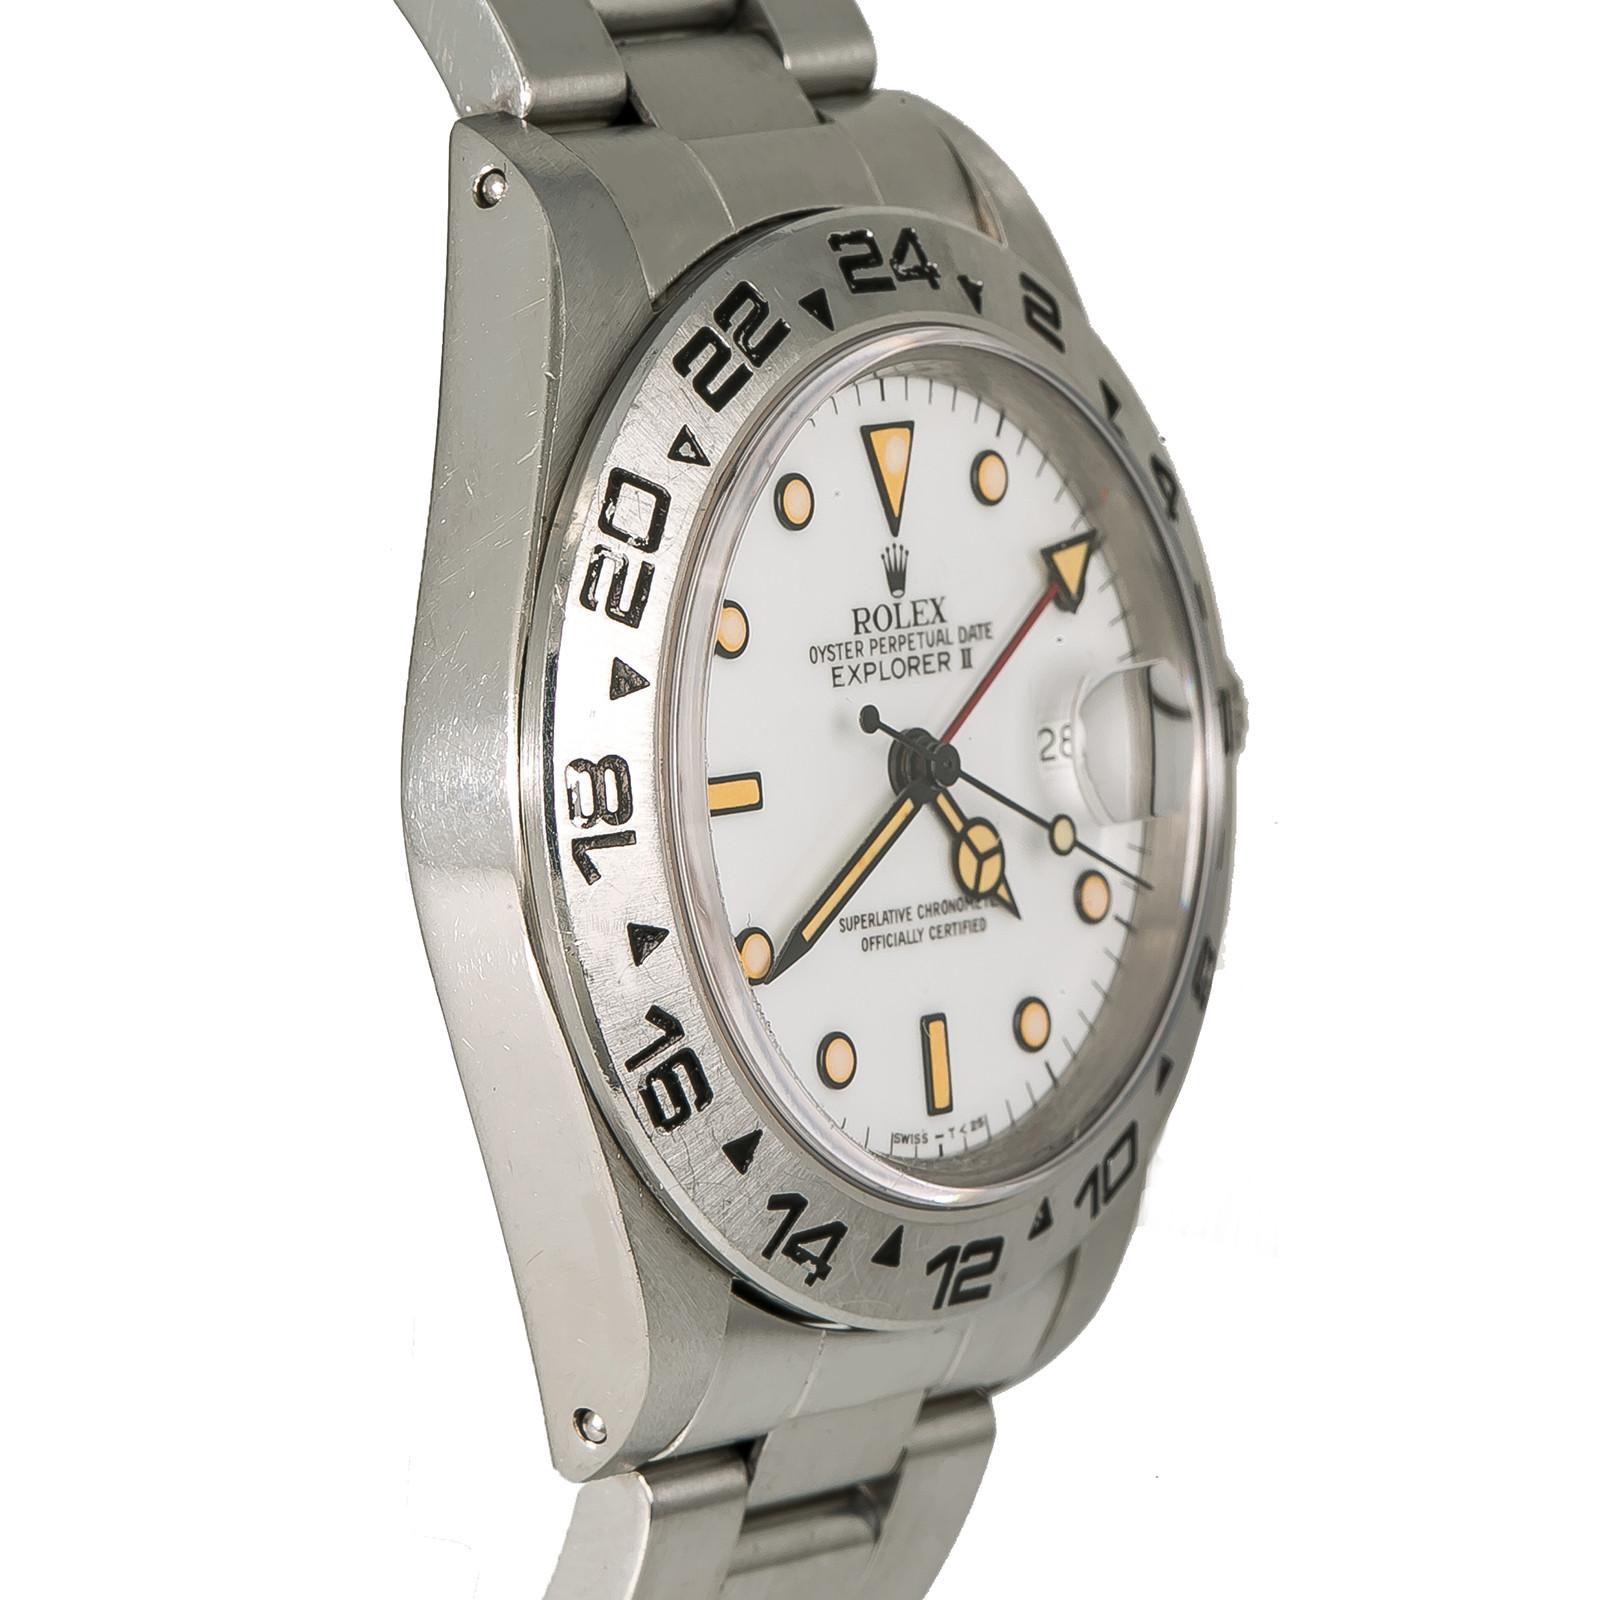 Rolex Explorer II 16550, White Dial, Certified and Warranty In Good Condition For Sale In Miami, FL